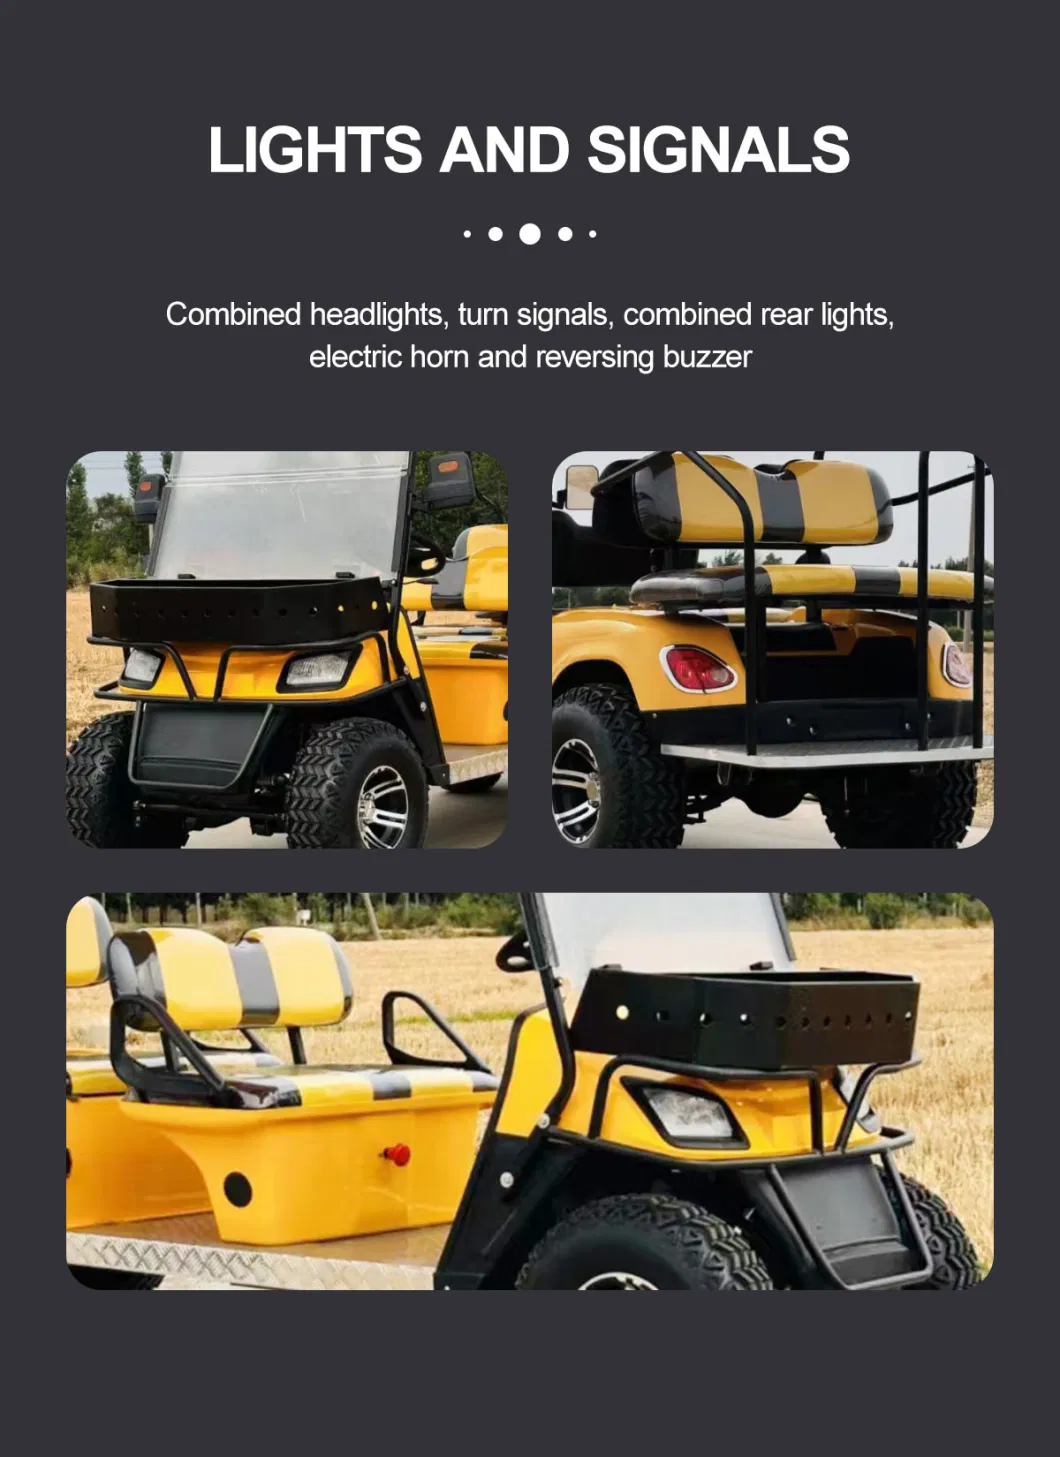 Electric The Villages Lift a Golf Carts Dealers 6 Seater Golf Cart